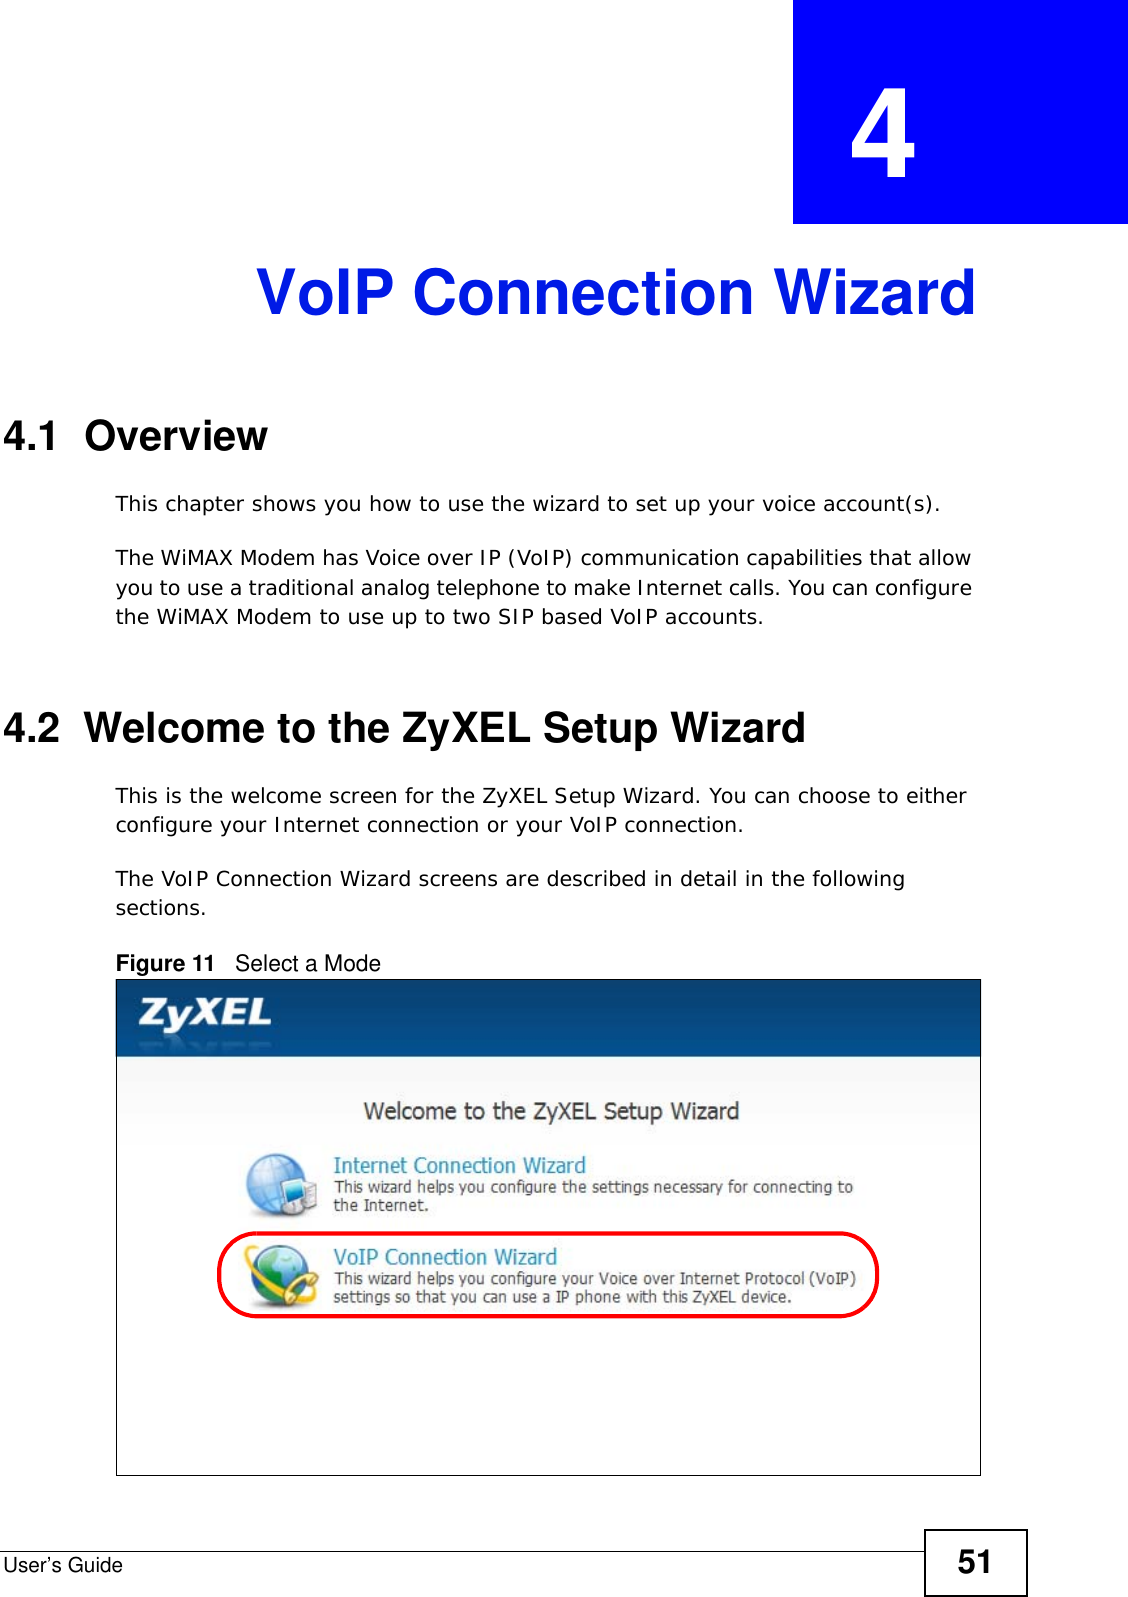 User’s Guide 51CHAPTER  4 VoIP Connection Wizard4.1  OverviewThis chapter shows you how to use the wizard to set up your voice account(s).The WiMAX Modem has Voice over IP (VoIP) communication capabilities that allow you to use a traditional analog telephone to make Internet calls. You can configure the WiMAX Modem to use up to two SIP based VoIP accounts.4.2  Welcome to the ZyXEL Setup WizardThis is the welcome screen for the ZyXEL Setup Wizard. You can choose to either configure your Internet connection or your VoIP connection.The VoIP Connection Wizard screens are described in detail in the following sections.Figure 11   Select a Mode